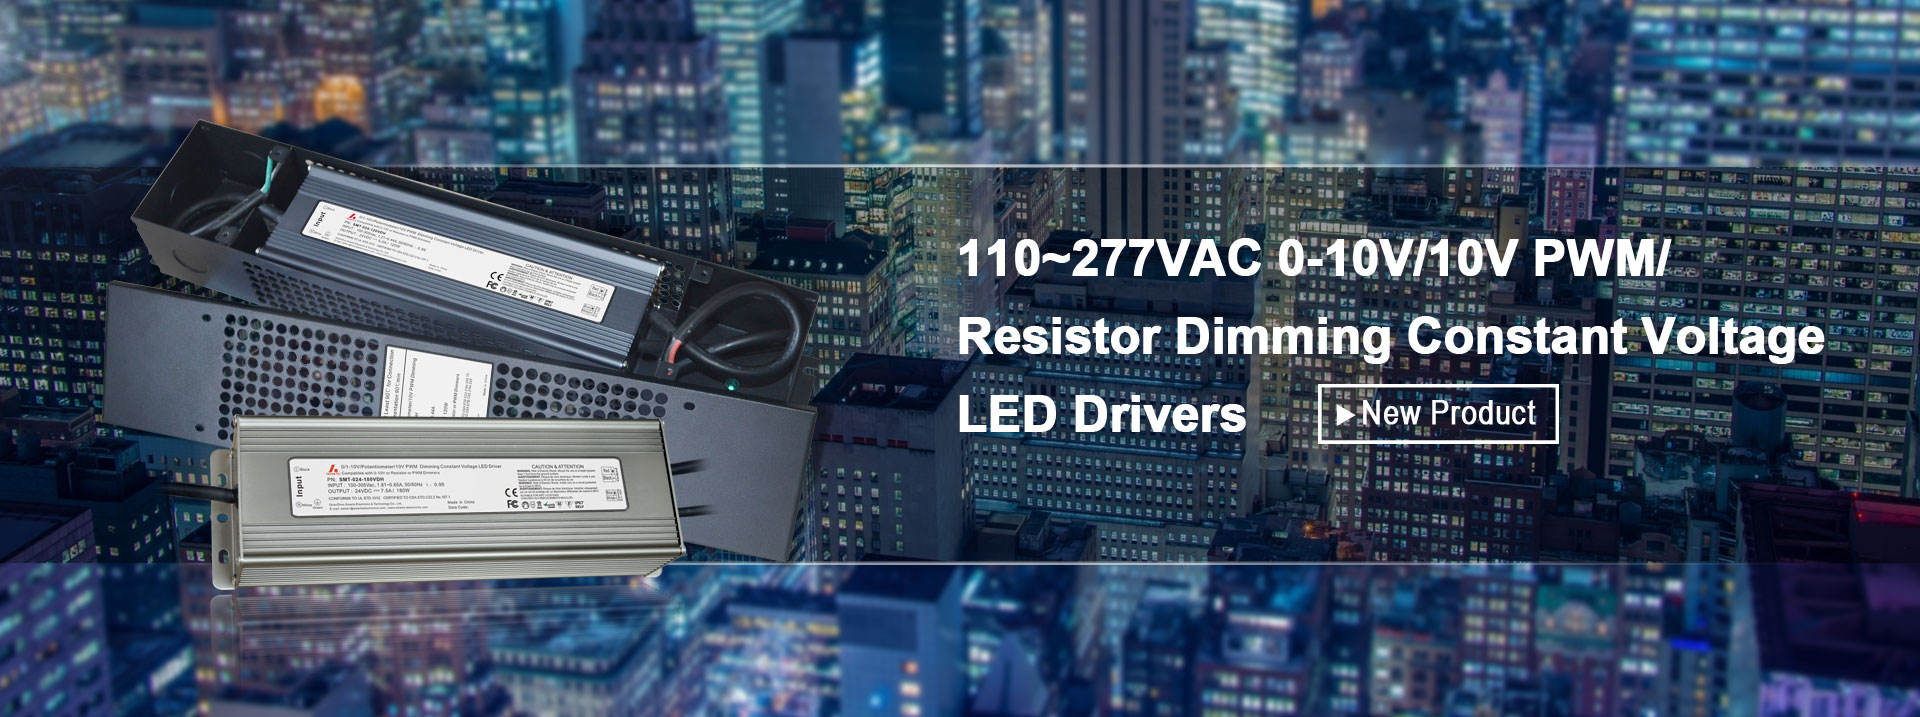 Resistor Dimming Constant Voltage LED Driver